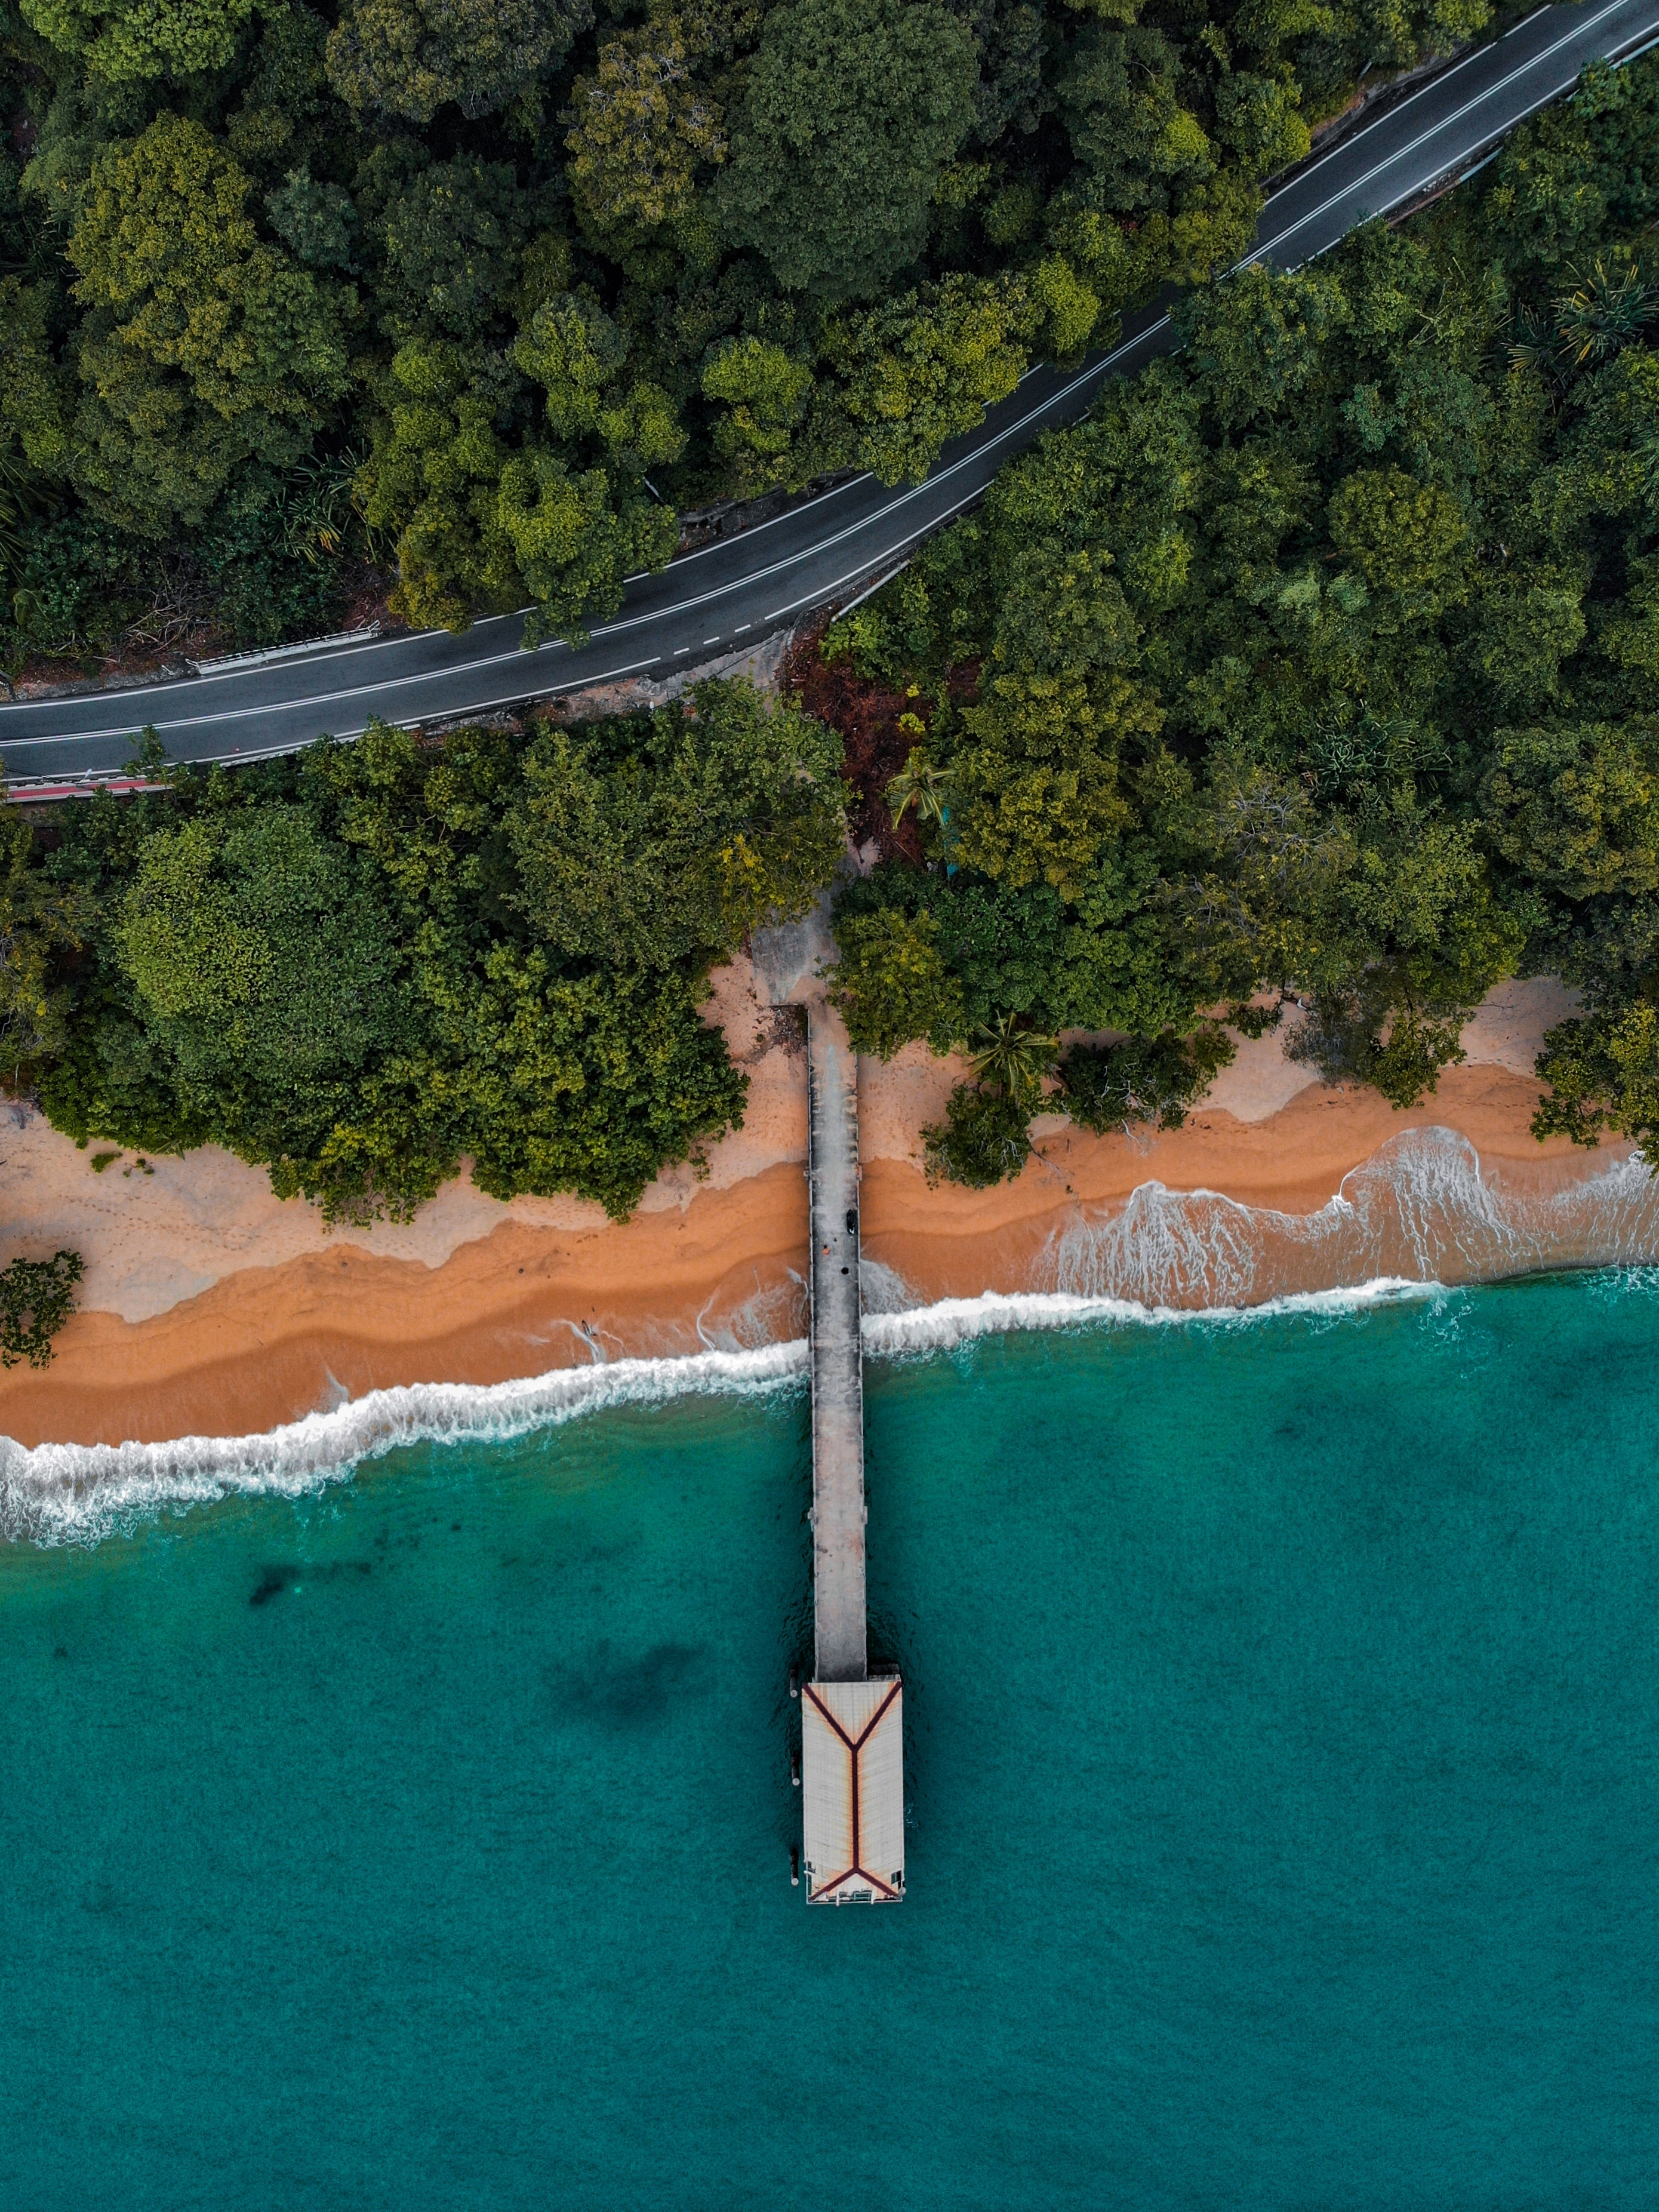 view from above, pier, coast, nature, trees, bungalow iphone wallpaper